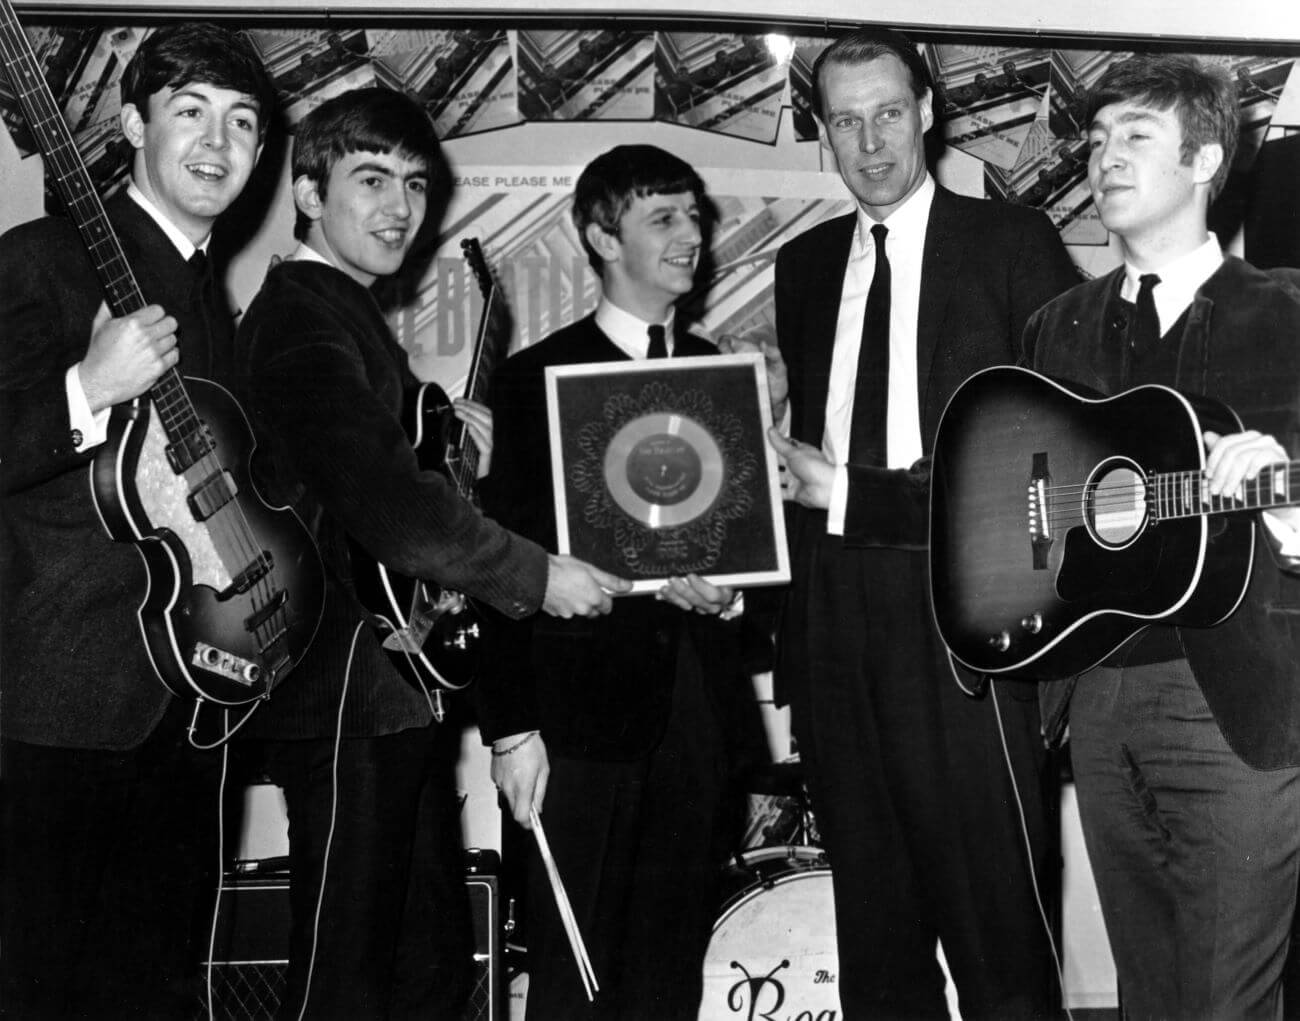 A black and white picture of Paul McCartney, George Harrison, Ringo Starr, George Martin, and John Lennon. McCartney, Harrison, and Lennon hold guitars while Starr holds a record.